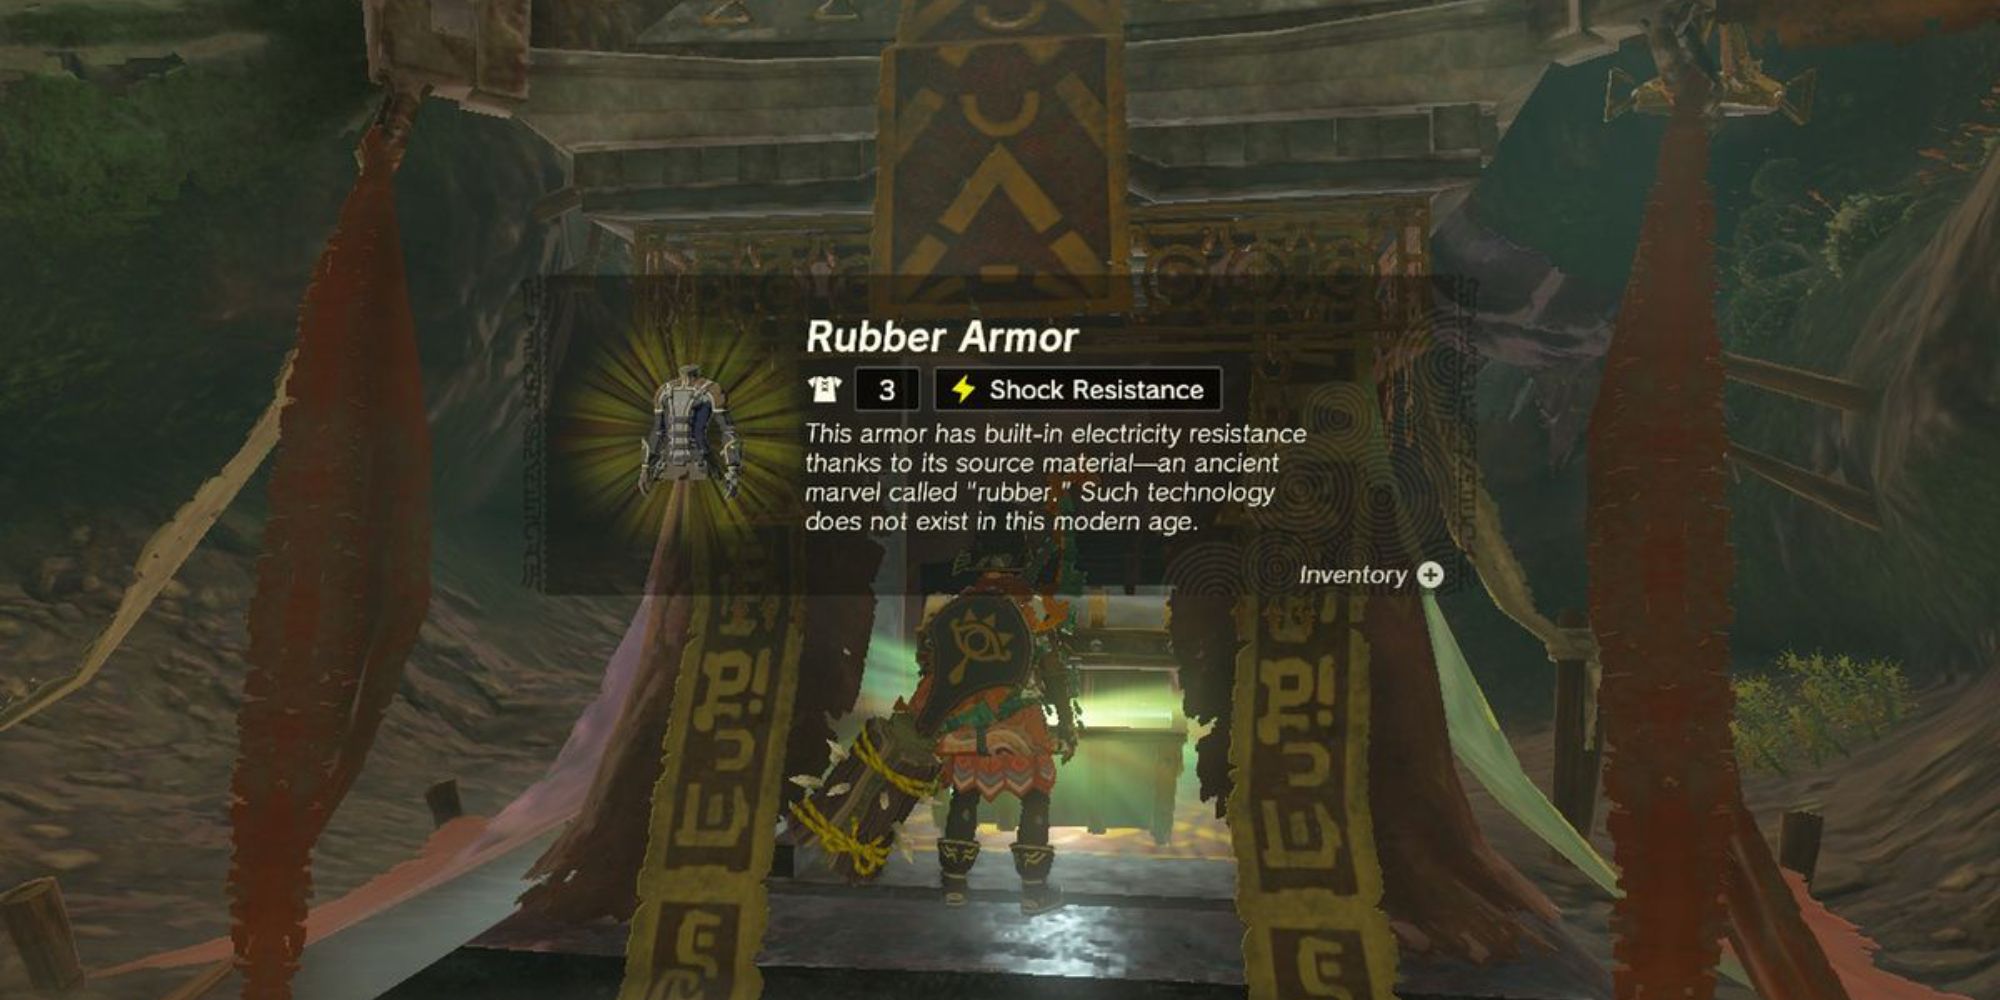 Link acquiring Rubber Armor from a treasure chest